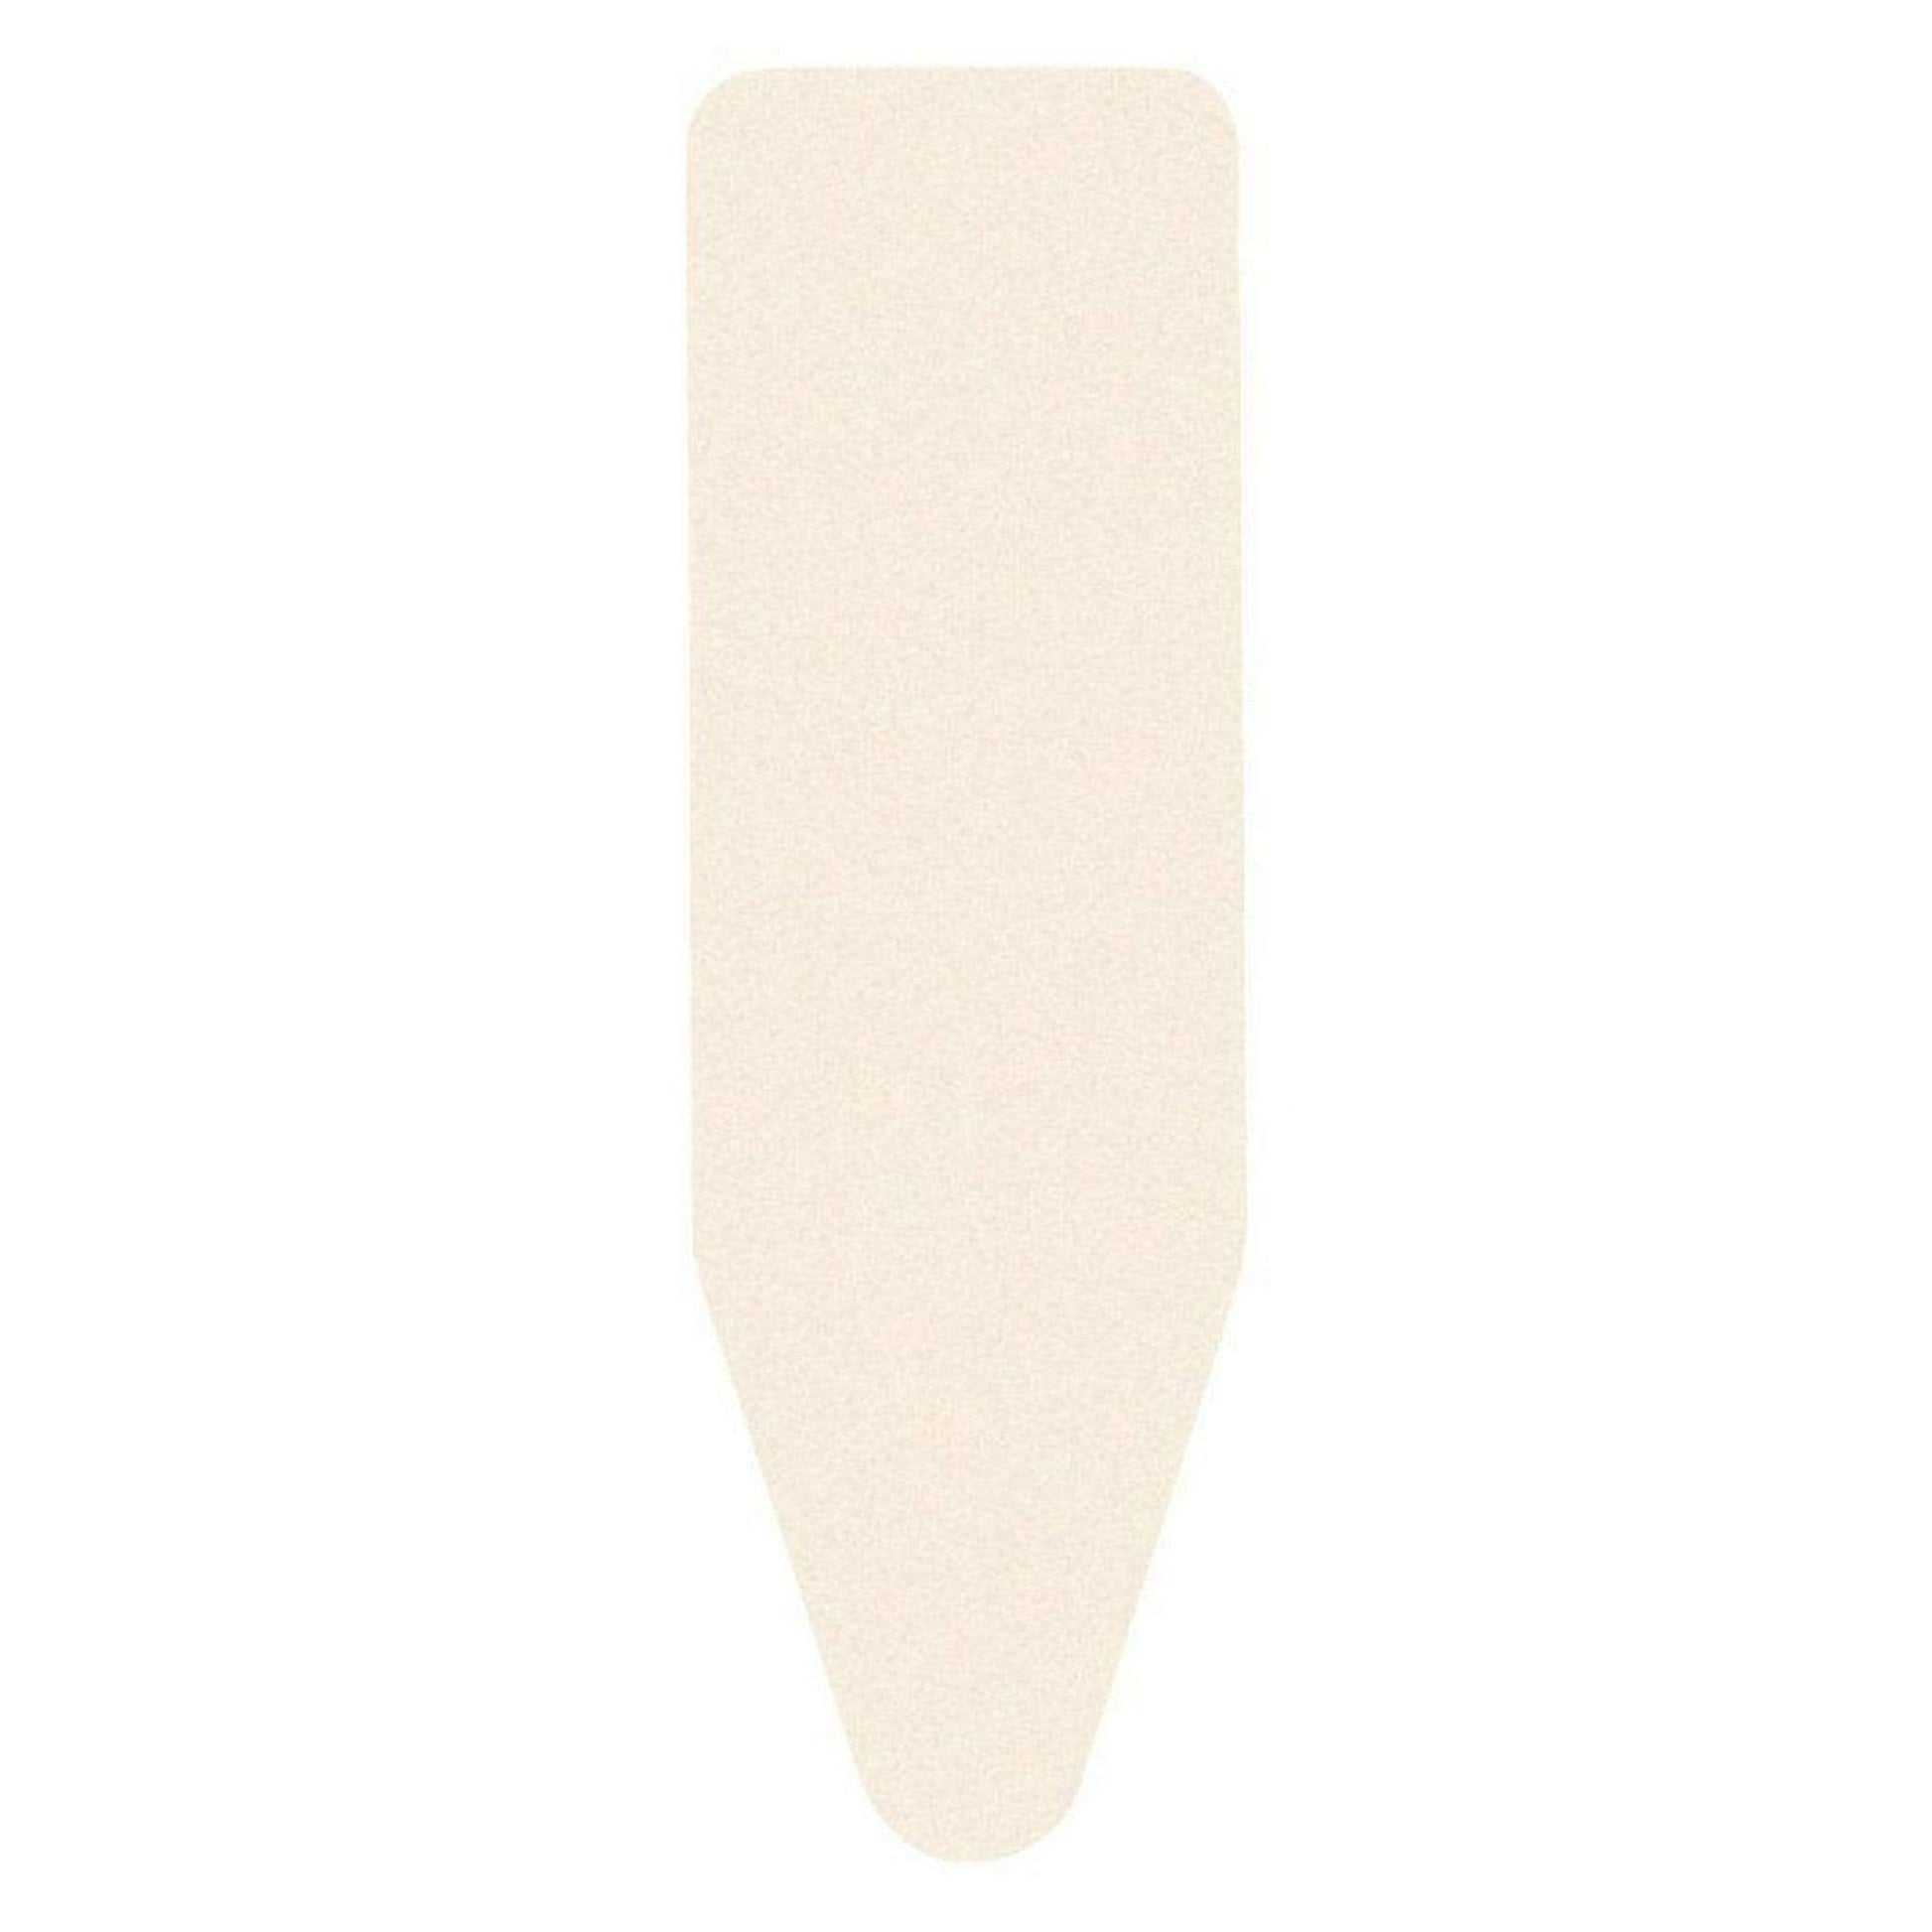 Kitchenware  -  Brabantia Neutral Ironing Board Cover 110x30cm  -  50015381